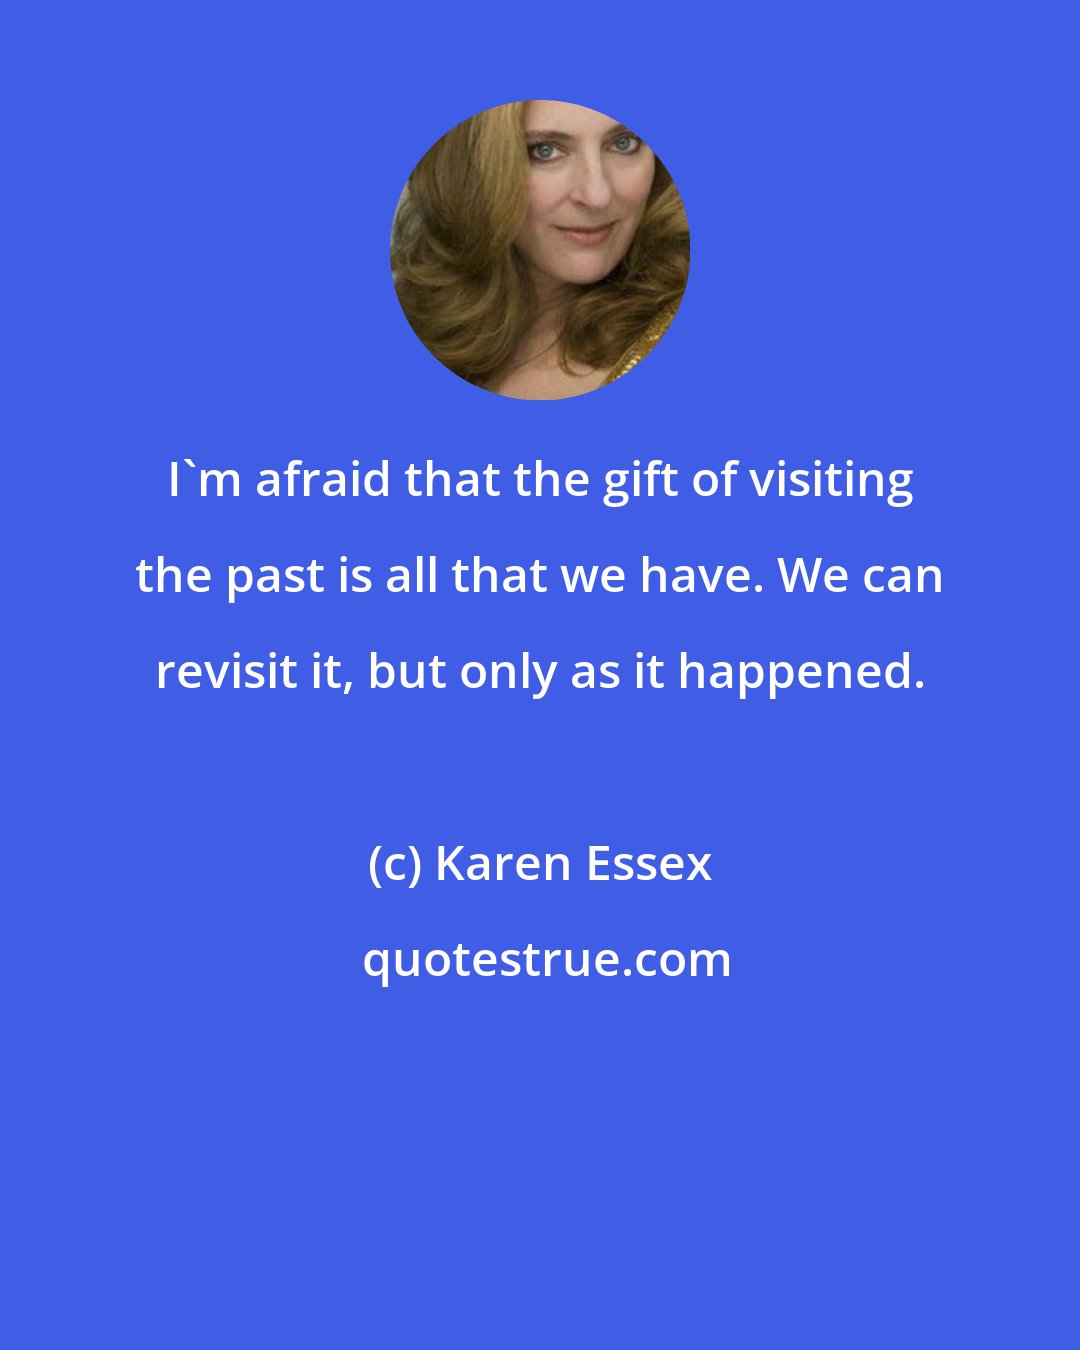 Karen Essex: I'm afraid that the gift of visiting the past is all that we have. We can revisit it, but only as it happened.